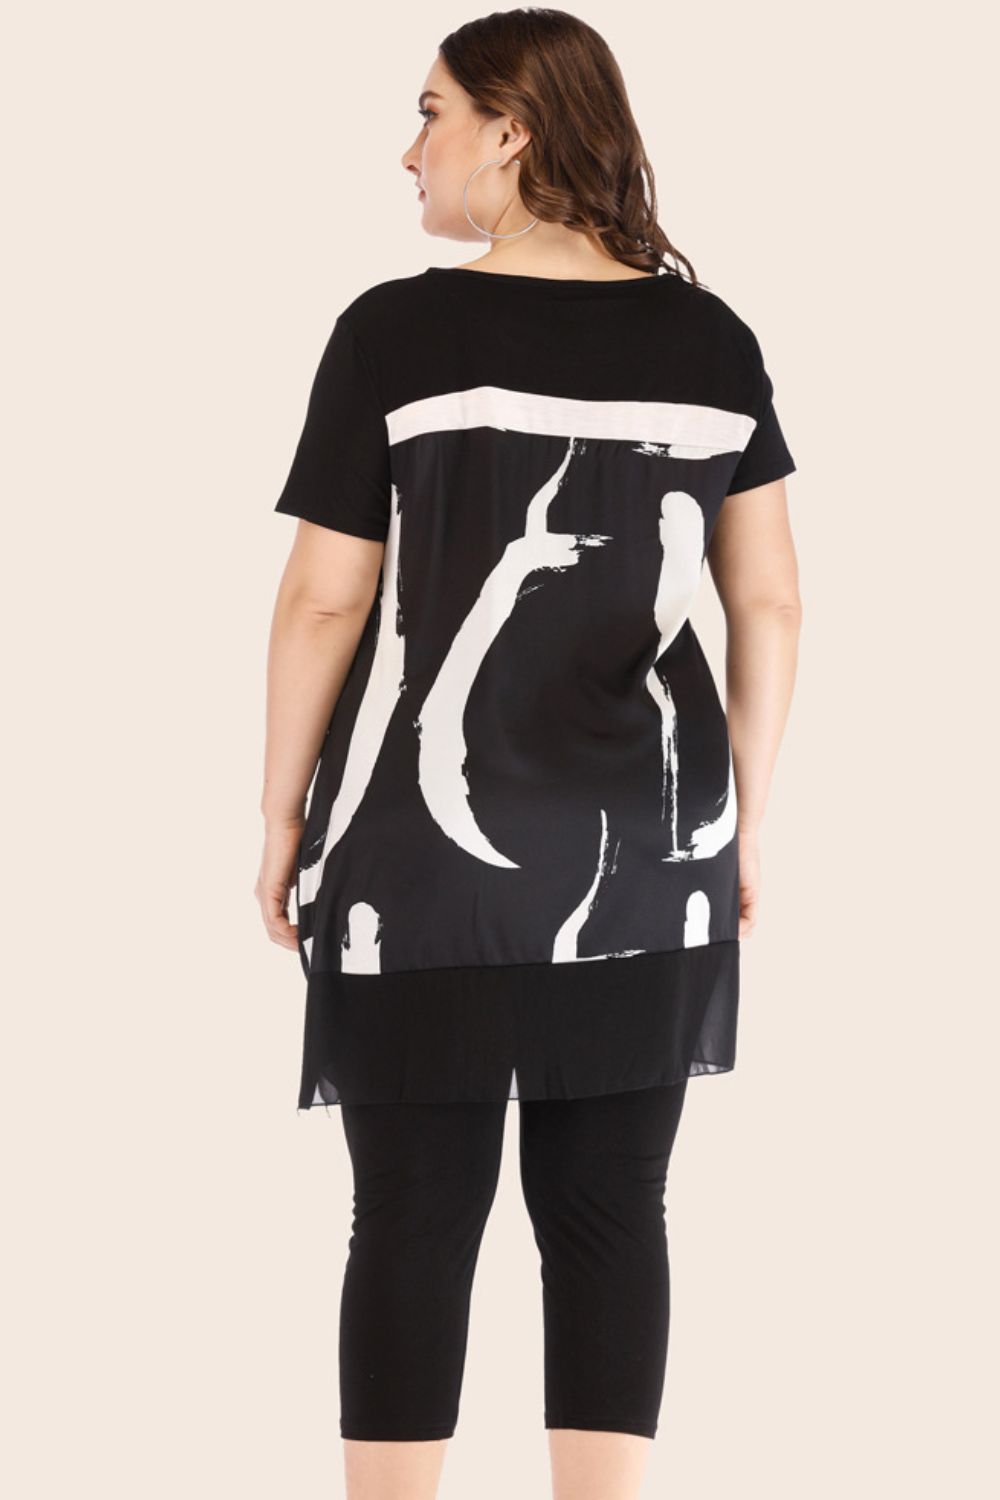 Contrast Spliced Mesh T-Shirt and Cropped Leggings Set